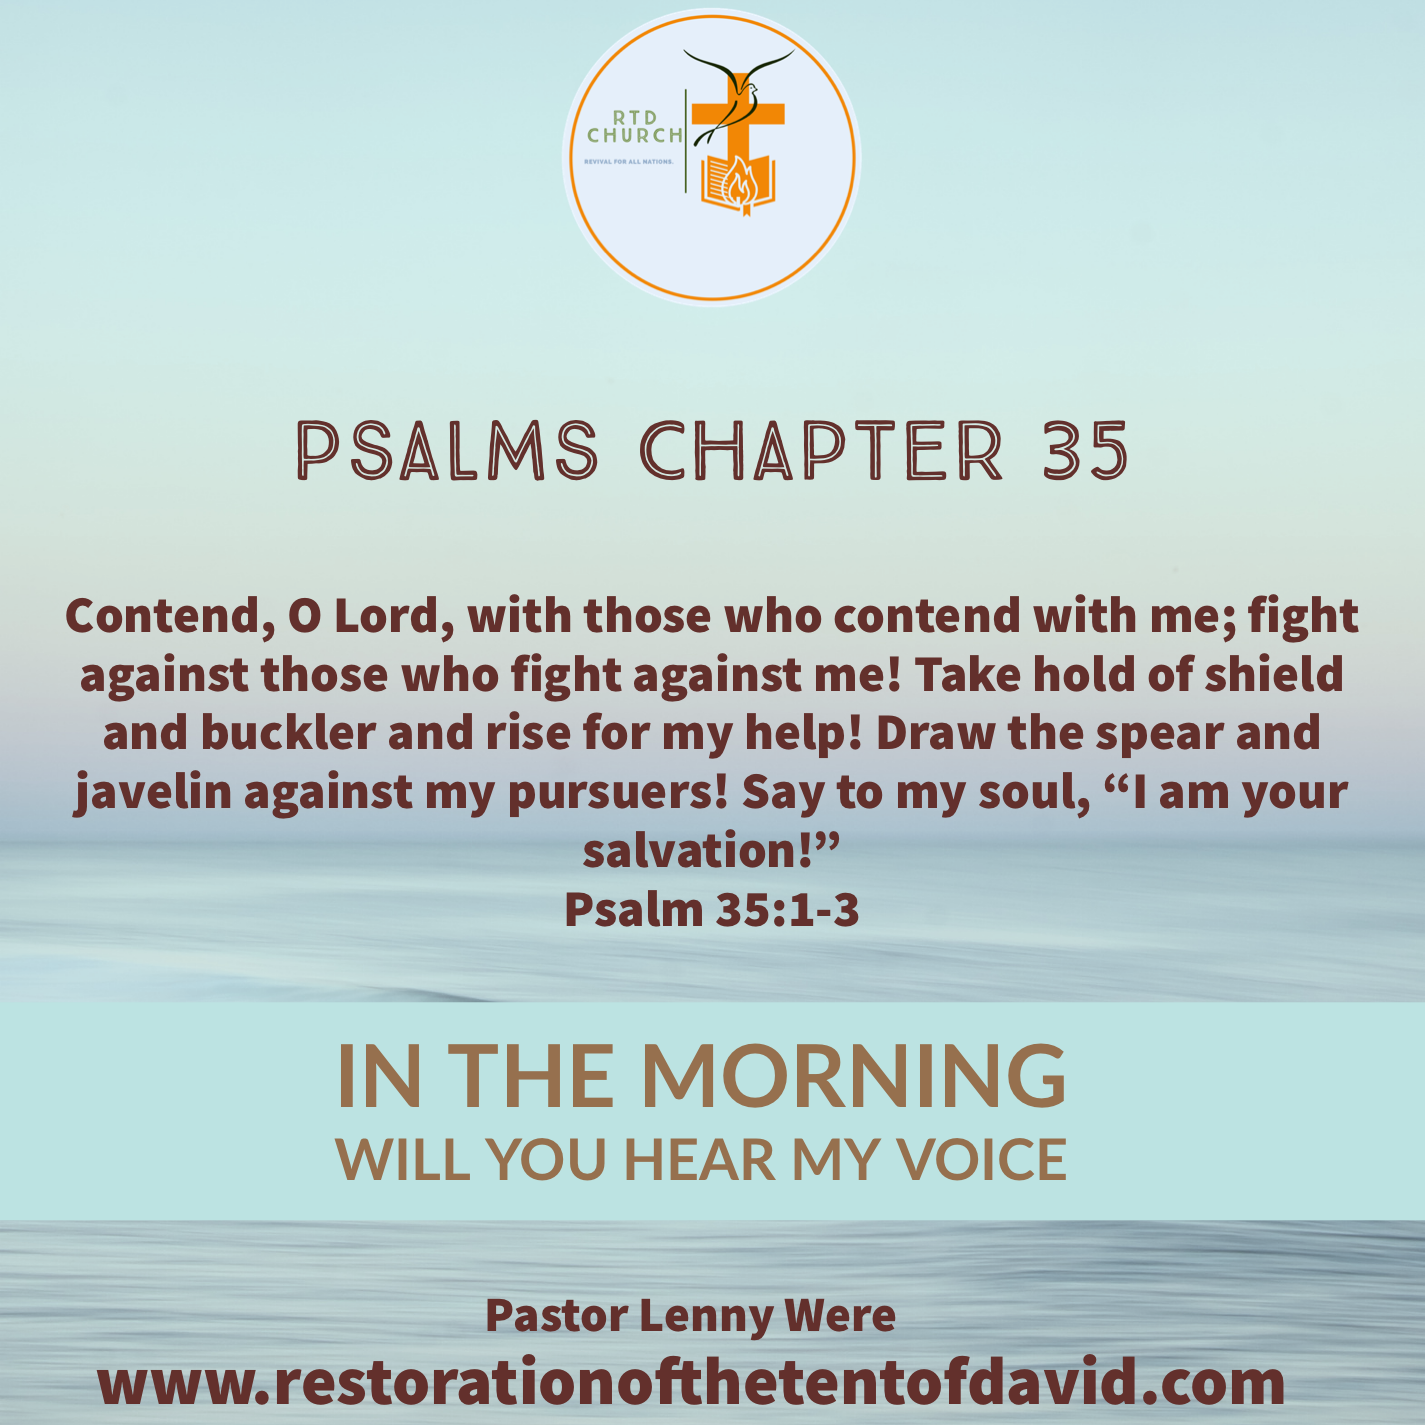 In the Morning will you Hear my Voice: Psalms Chapter 35.